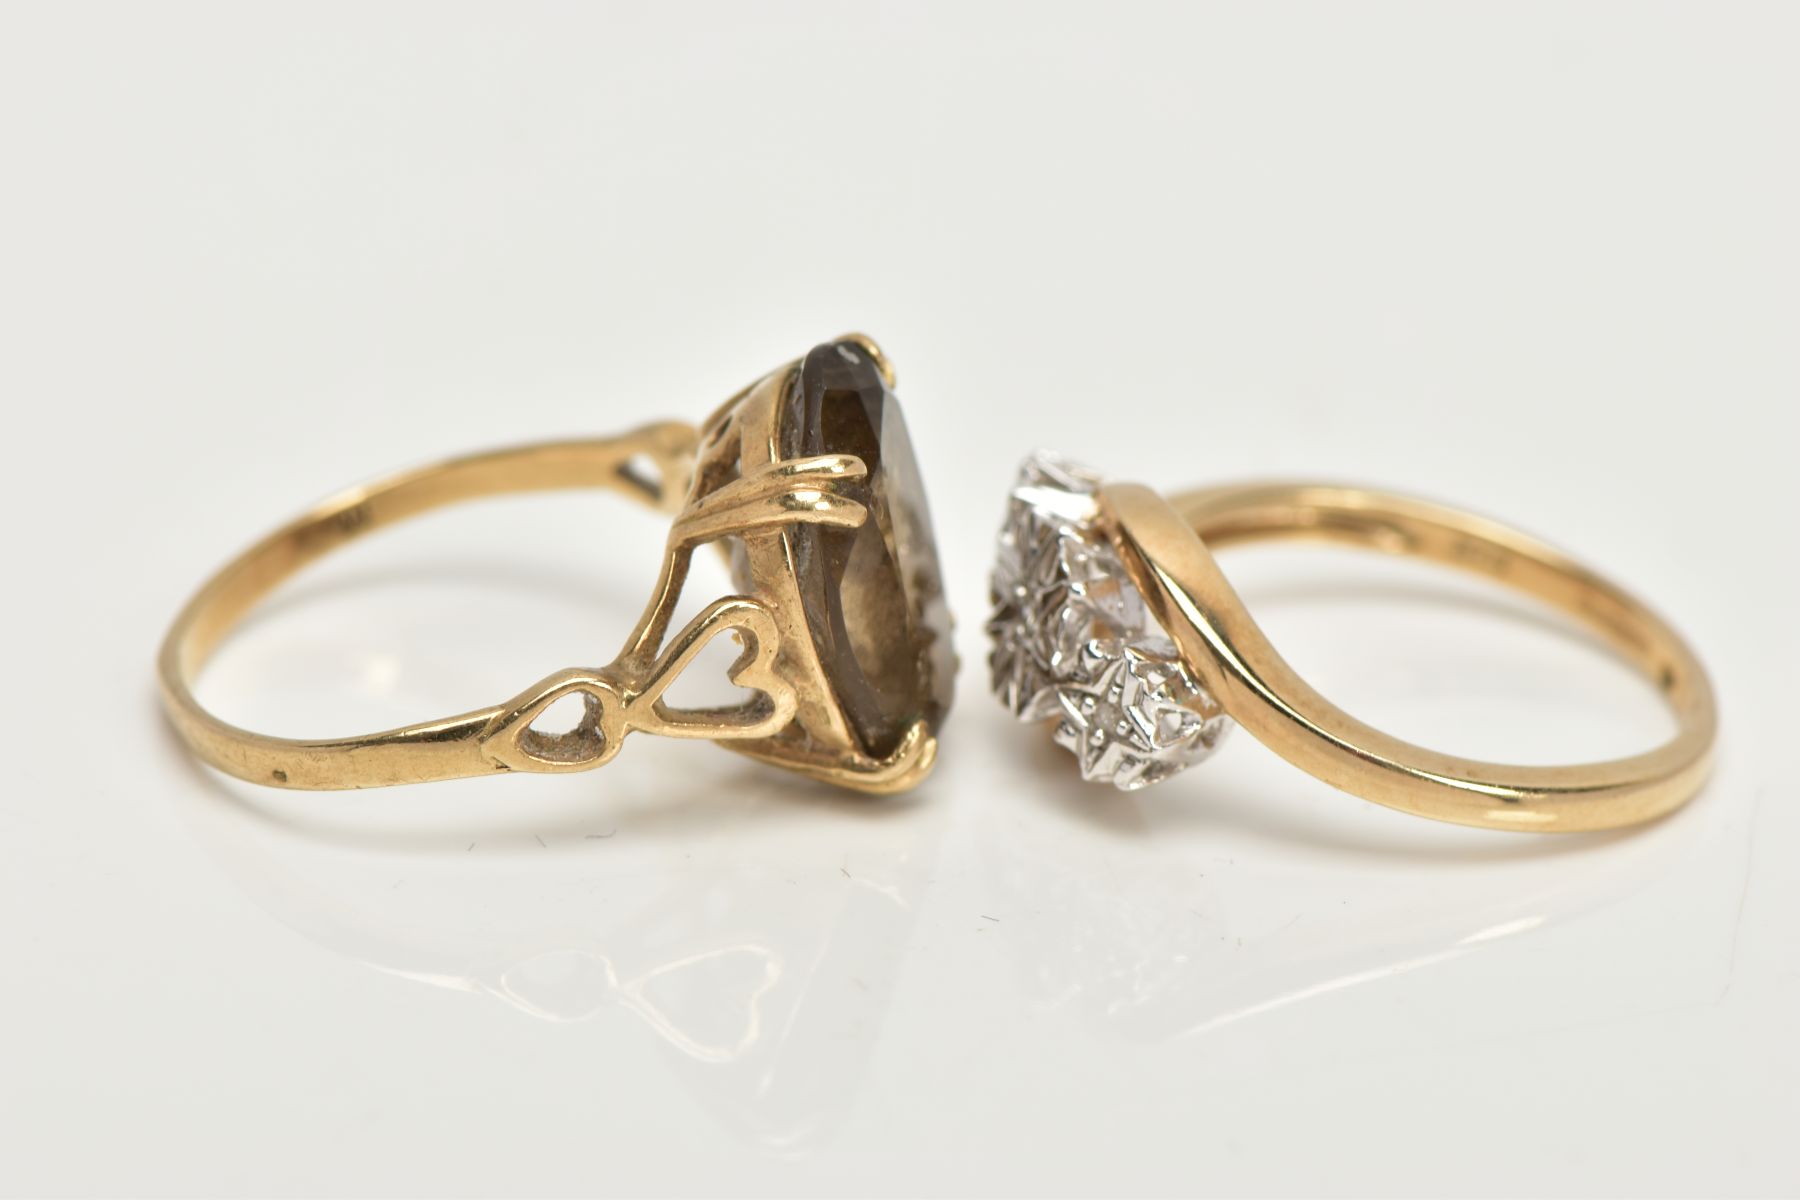 TWO 9CT GOLD RINGS, an oval cut stone assessed as Smokey quartz, prong set in a yellow gold, leading - Image 2 of 4